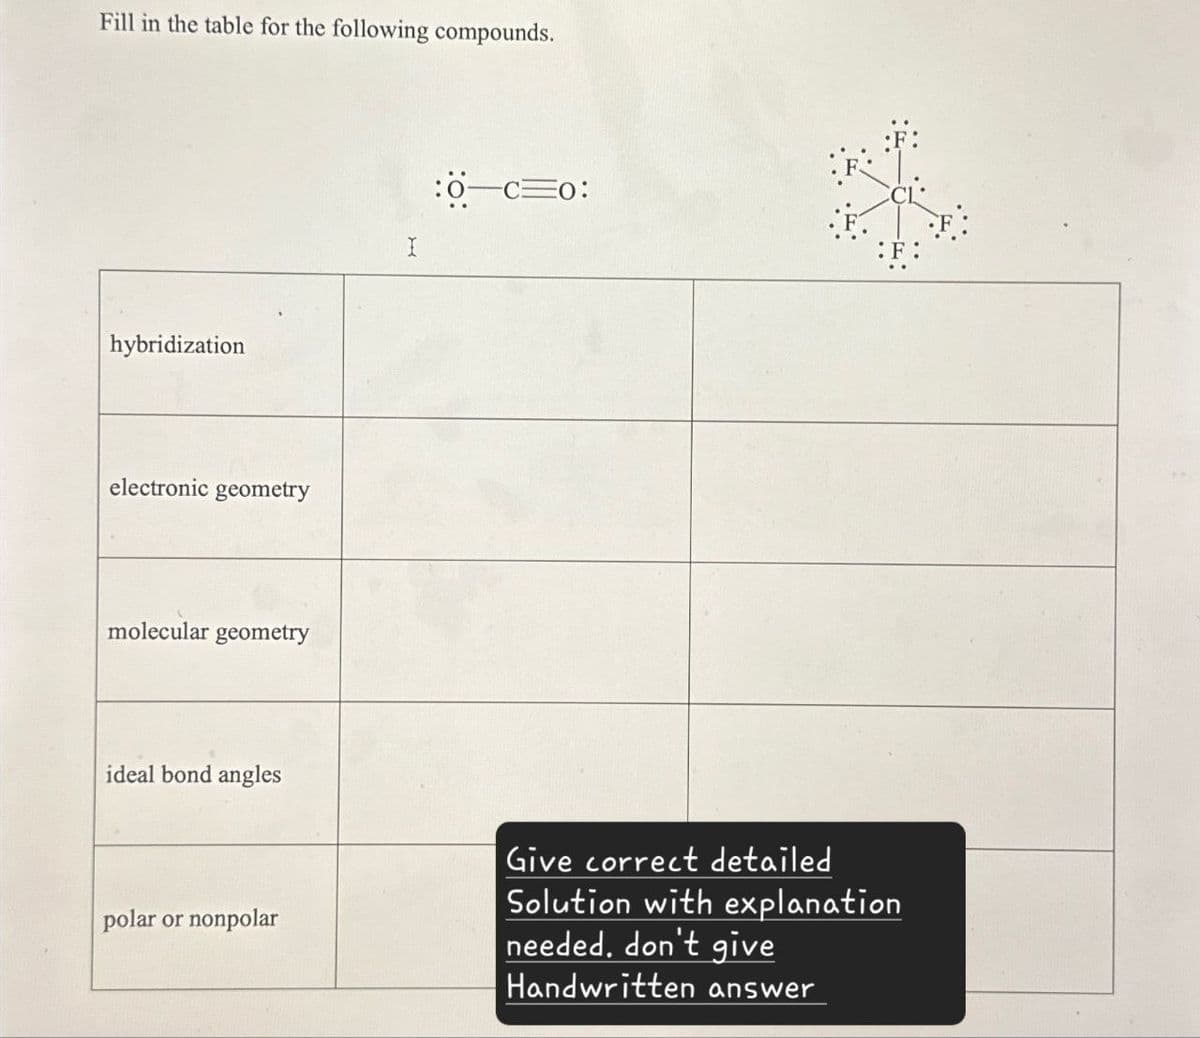 Fill in the table for the following compounds.
hybridization
electronic geometry
molecular geometry
:0-c=0:
ideal bond angles
polar or nonpolar
Give correct detailed
Solution with explanation
needed. don't give
Handwritten answer